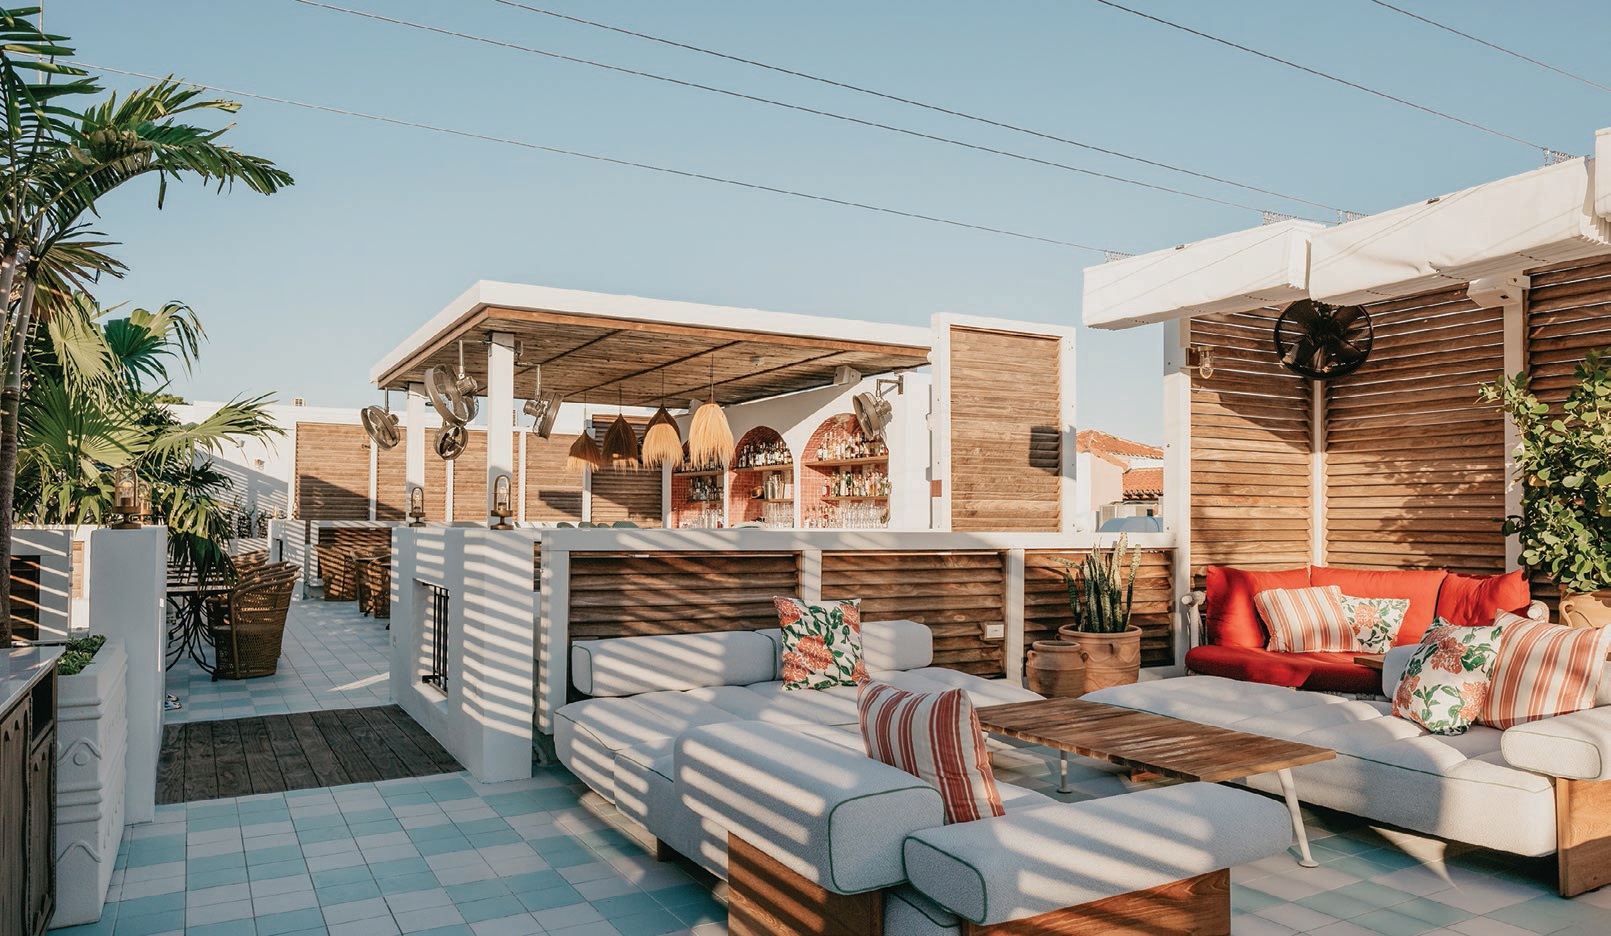 Lounge seating on The Roof makes for the perfect hangout destination. PHOTO BY JEN CASTRO